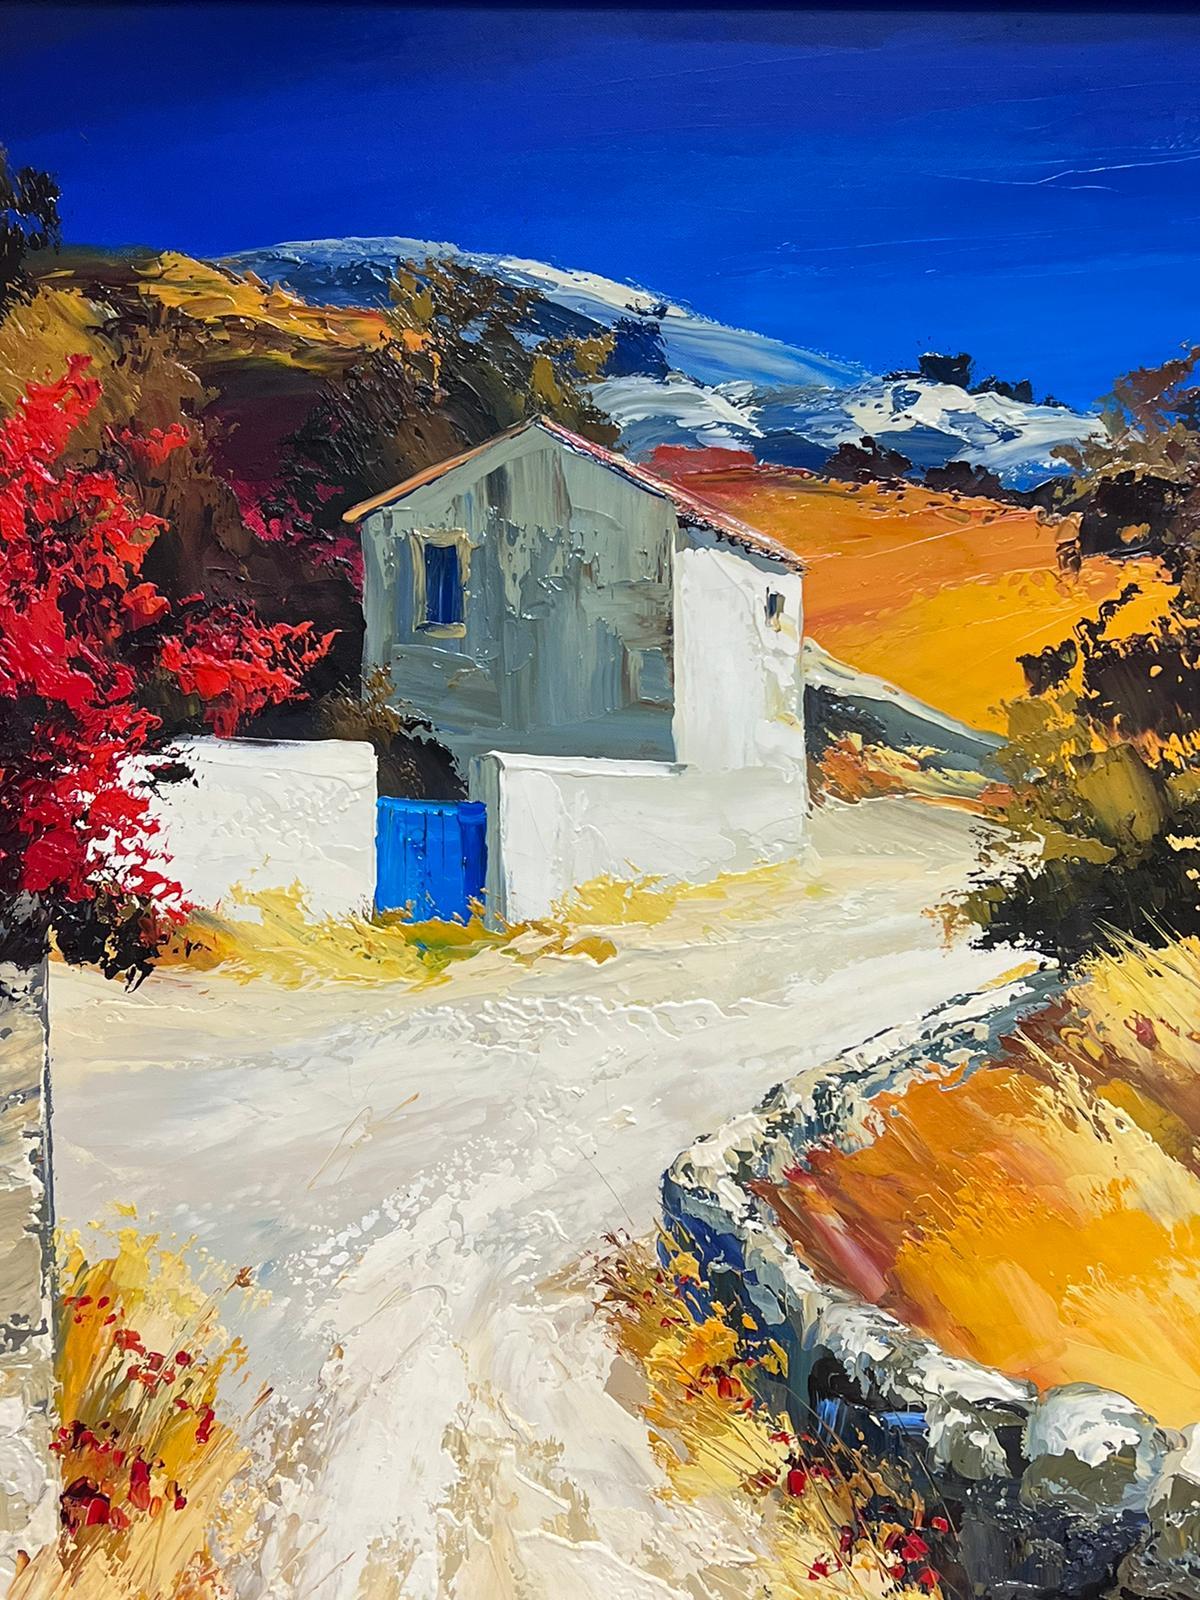 The Provencal House
French School, late 20th/ early 21st
indistinctly signed
oil on canvas, framed
framed: 39 x 32 inches
canvas: 32 x 26 inches
provenance: private collection
condition: very good and sound condition